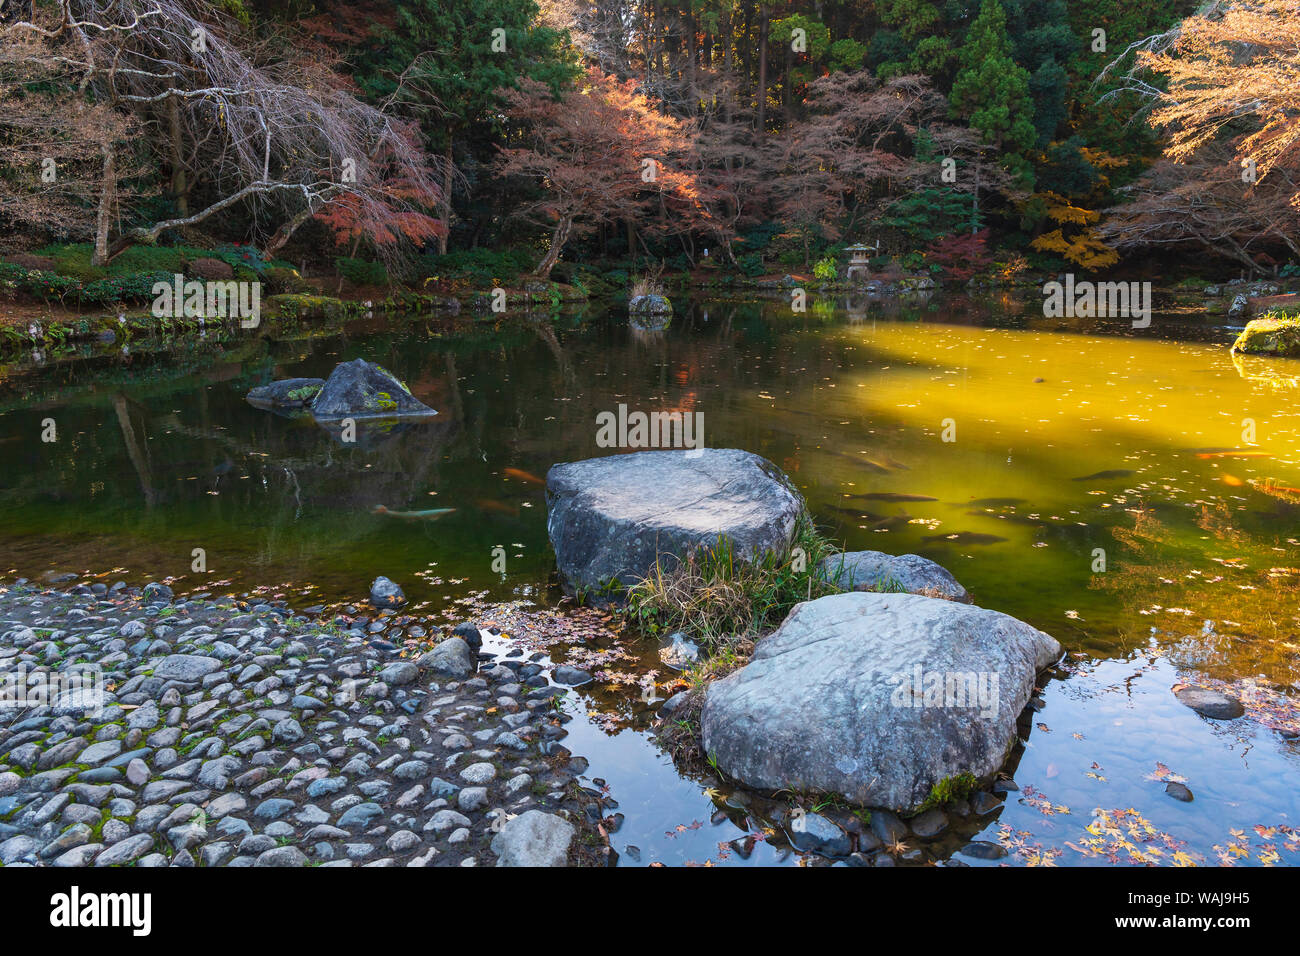 Rock path in the lake filled with koi fish in the Narita Temple Gardens Stock Photo